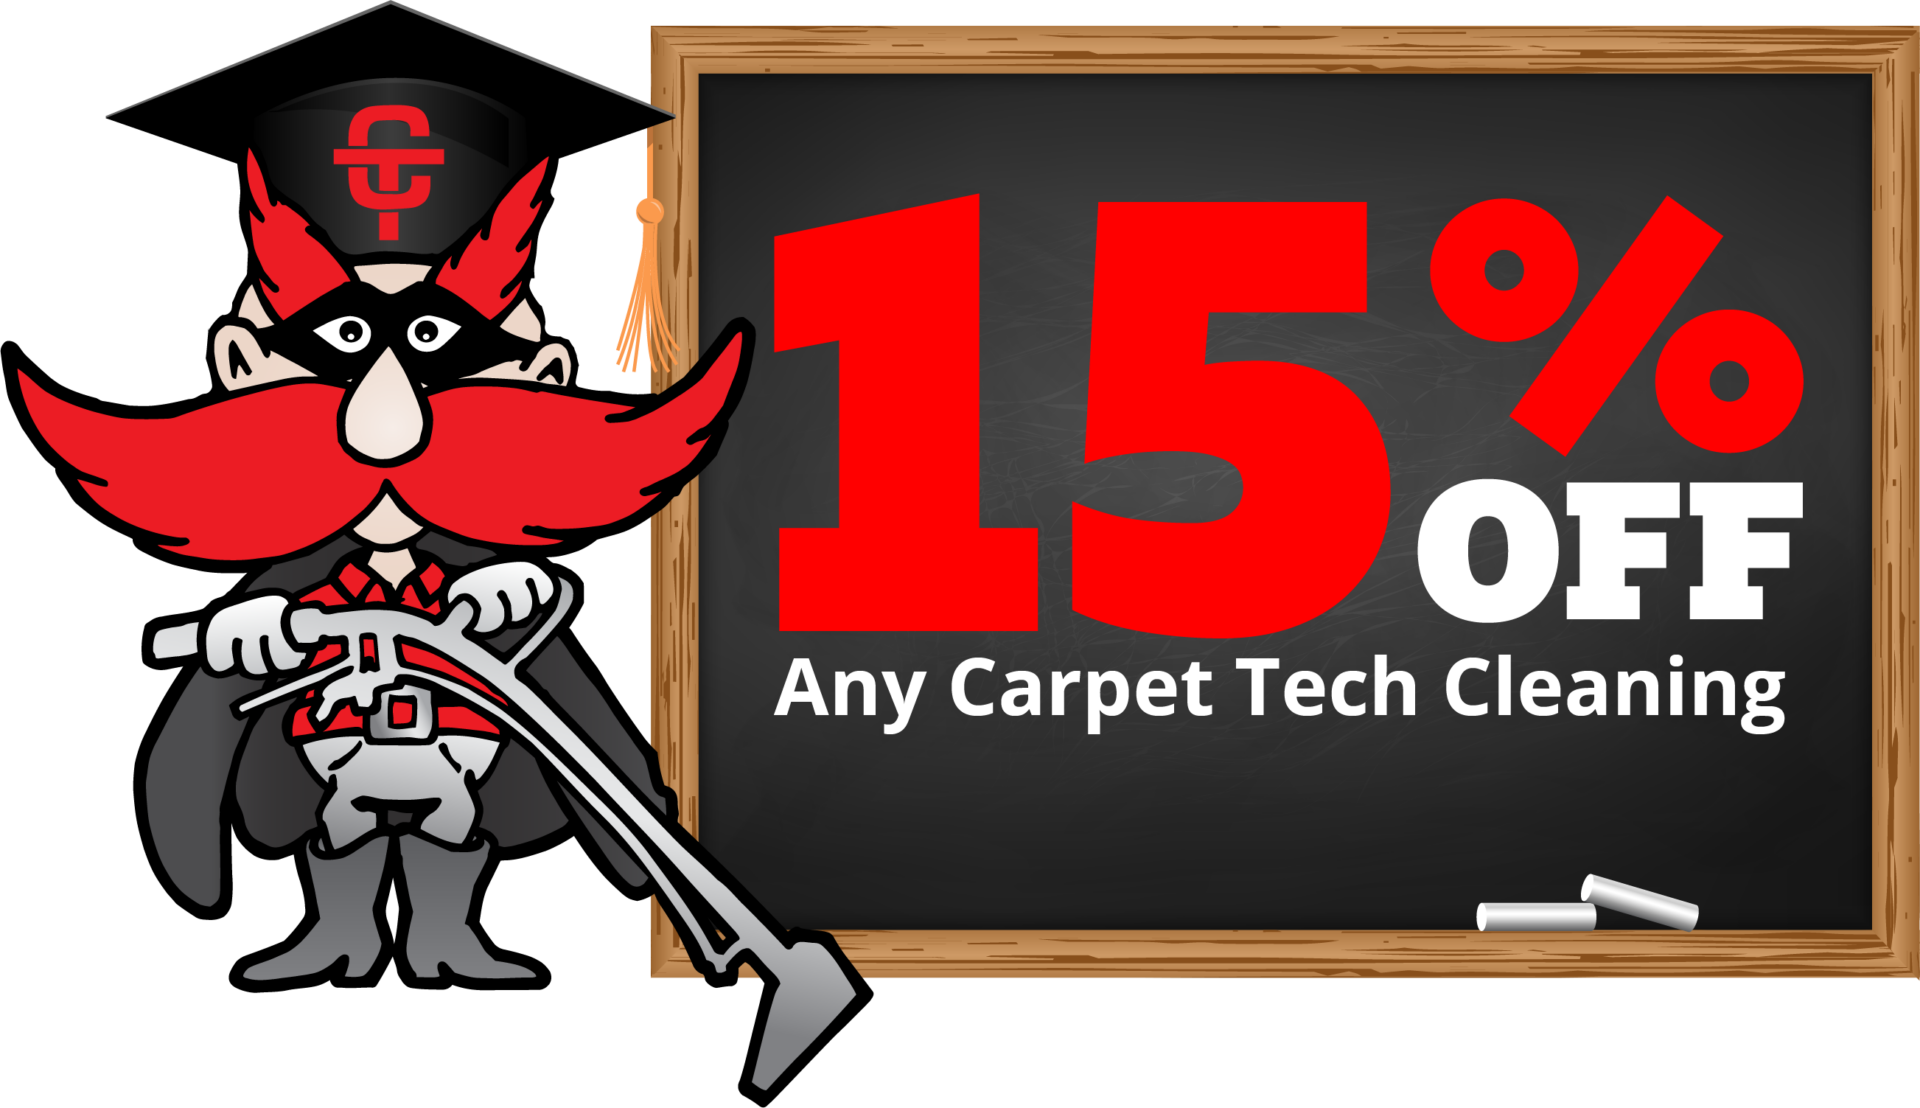 Teachers get 15% Off any Carpet Cleaning Service